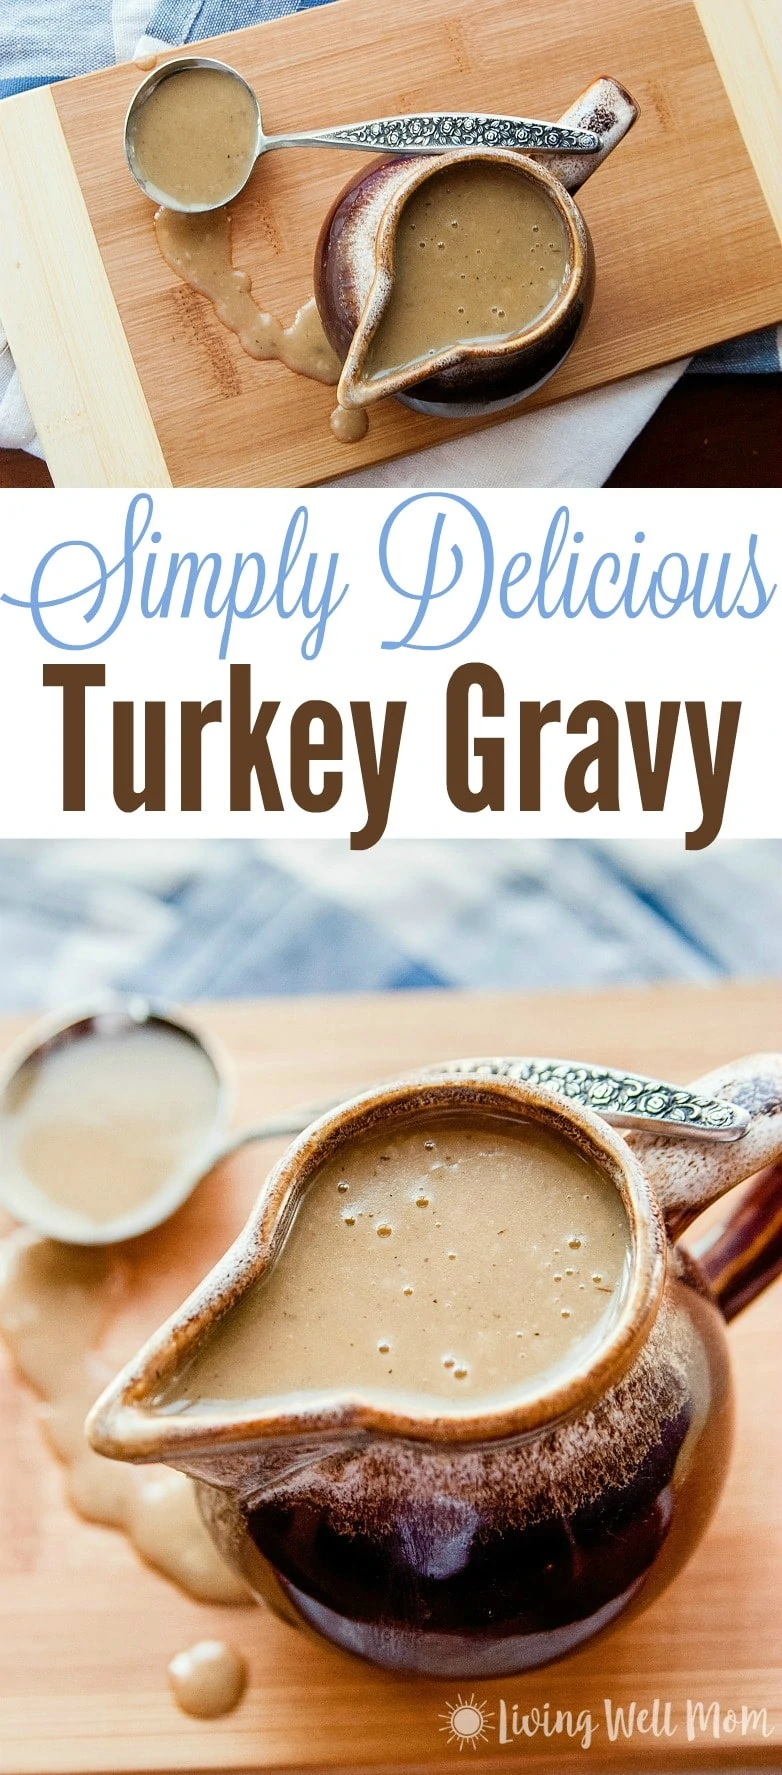 Simply Delicious Turkey Gravy - this recipe is simple to make and tastes amazing. Includes step-by-step directions for those who are new to gravy making.